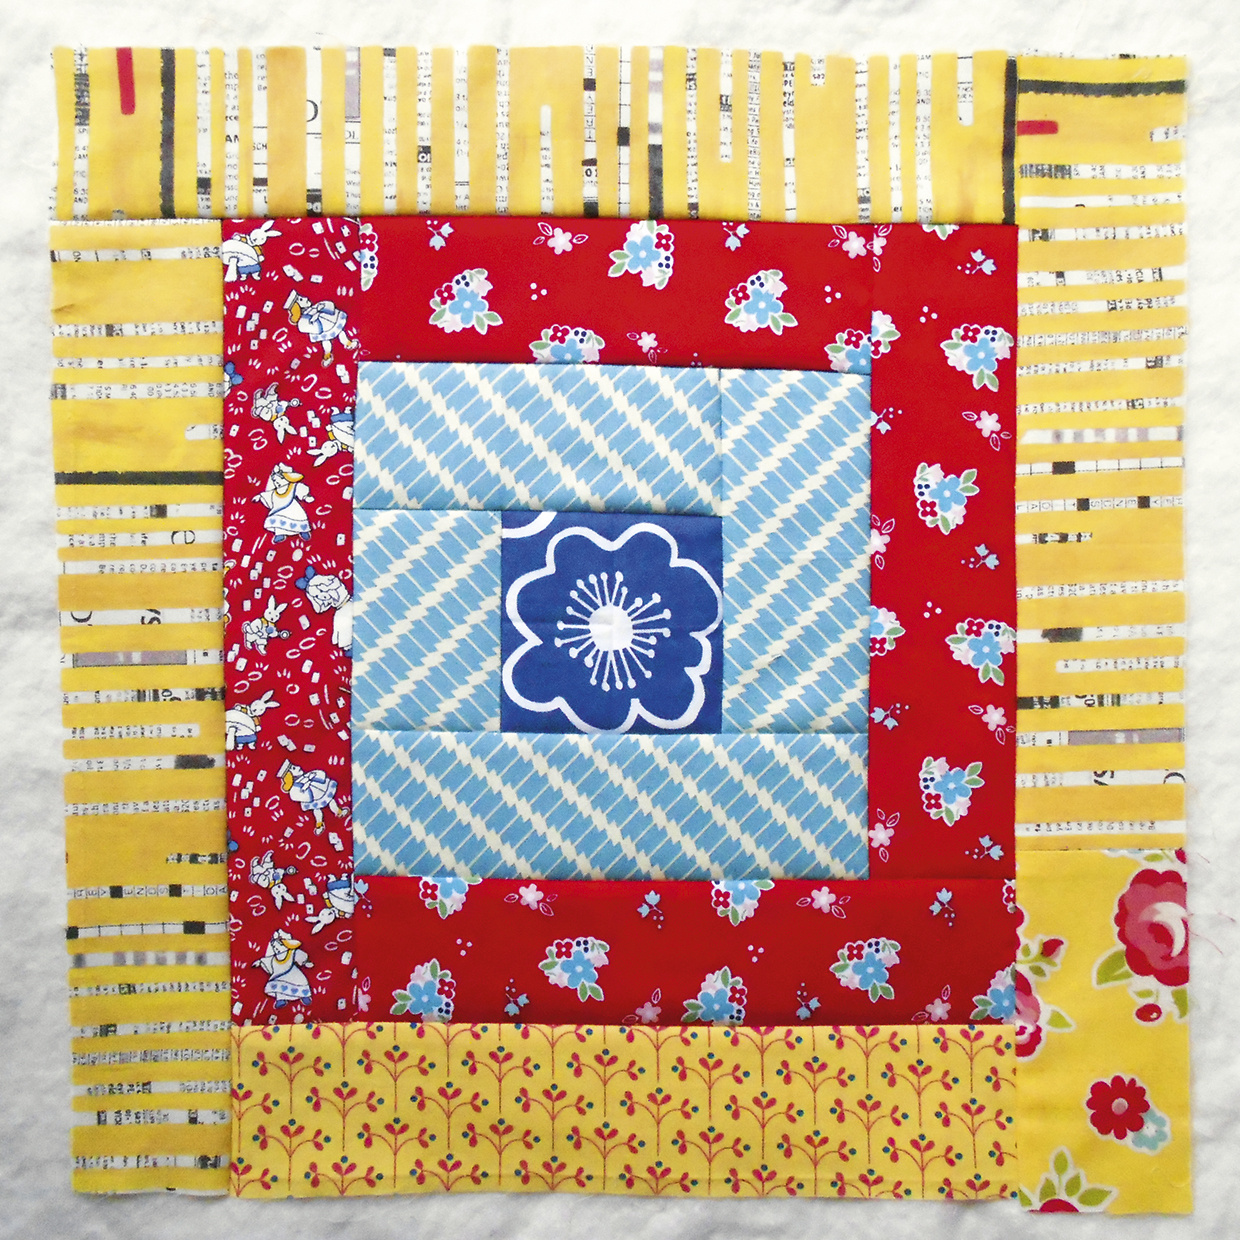 How to make a Jelly Roll Quilt step 7